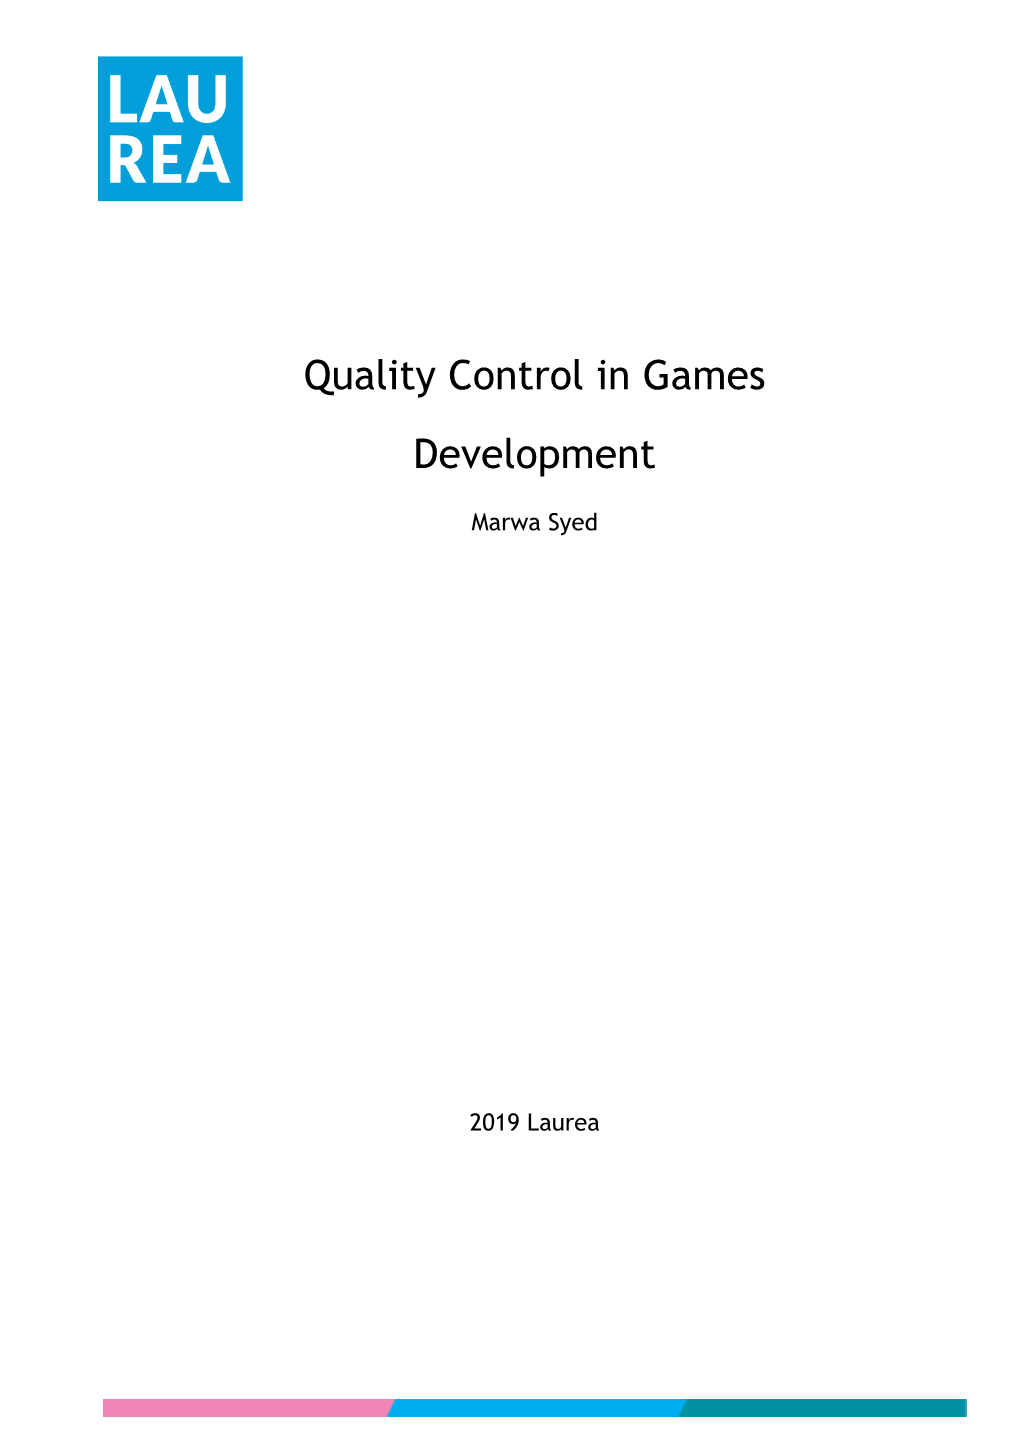 Quality Control in Games Development